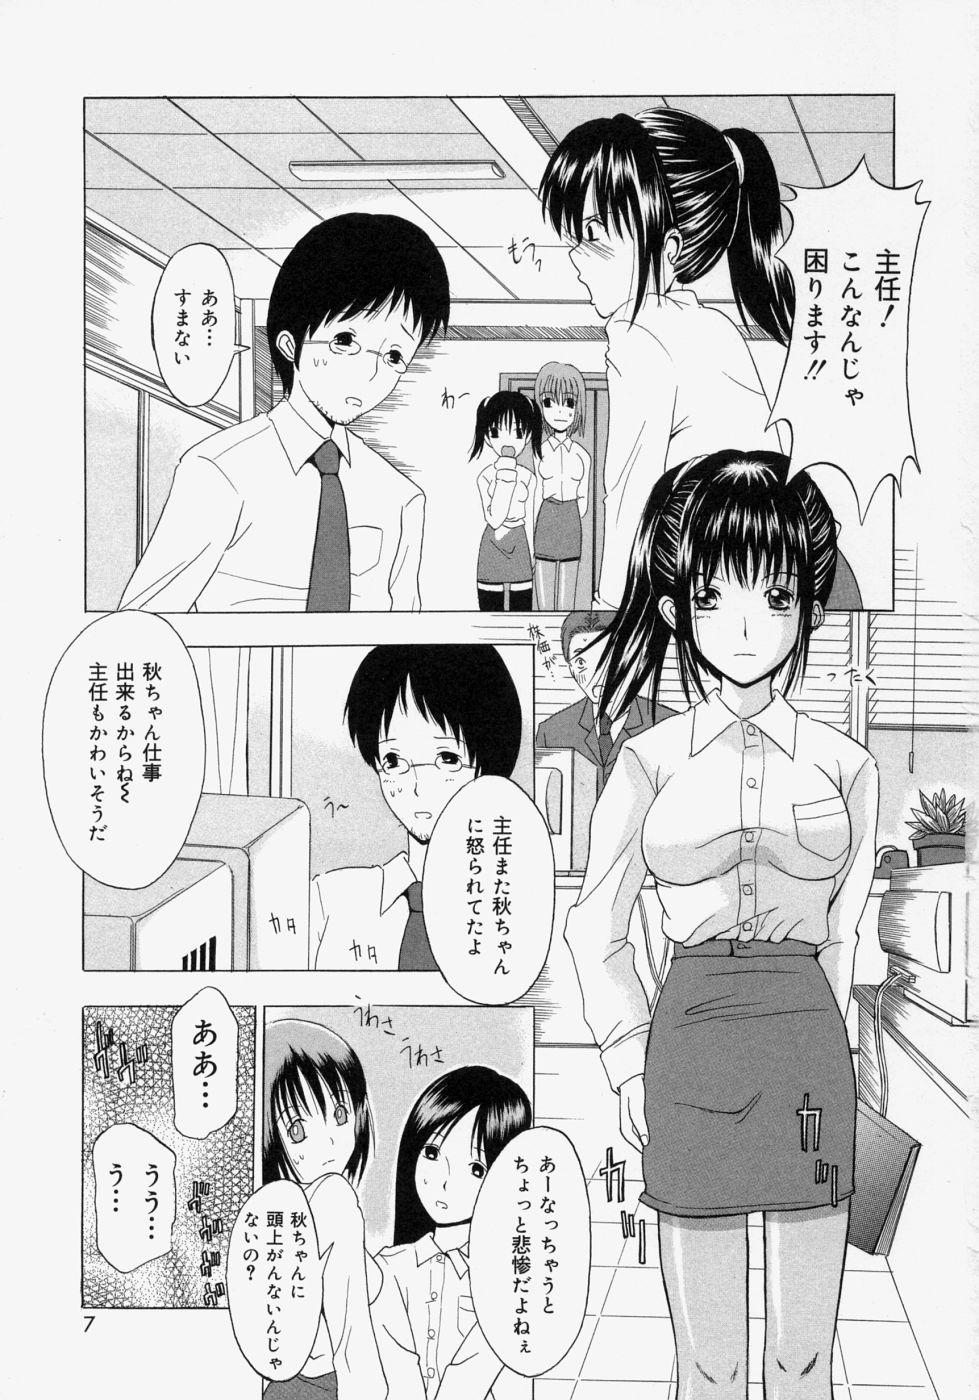 Cute Omote to Ura - The face and reverse side Freckles - Page 7